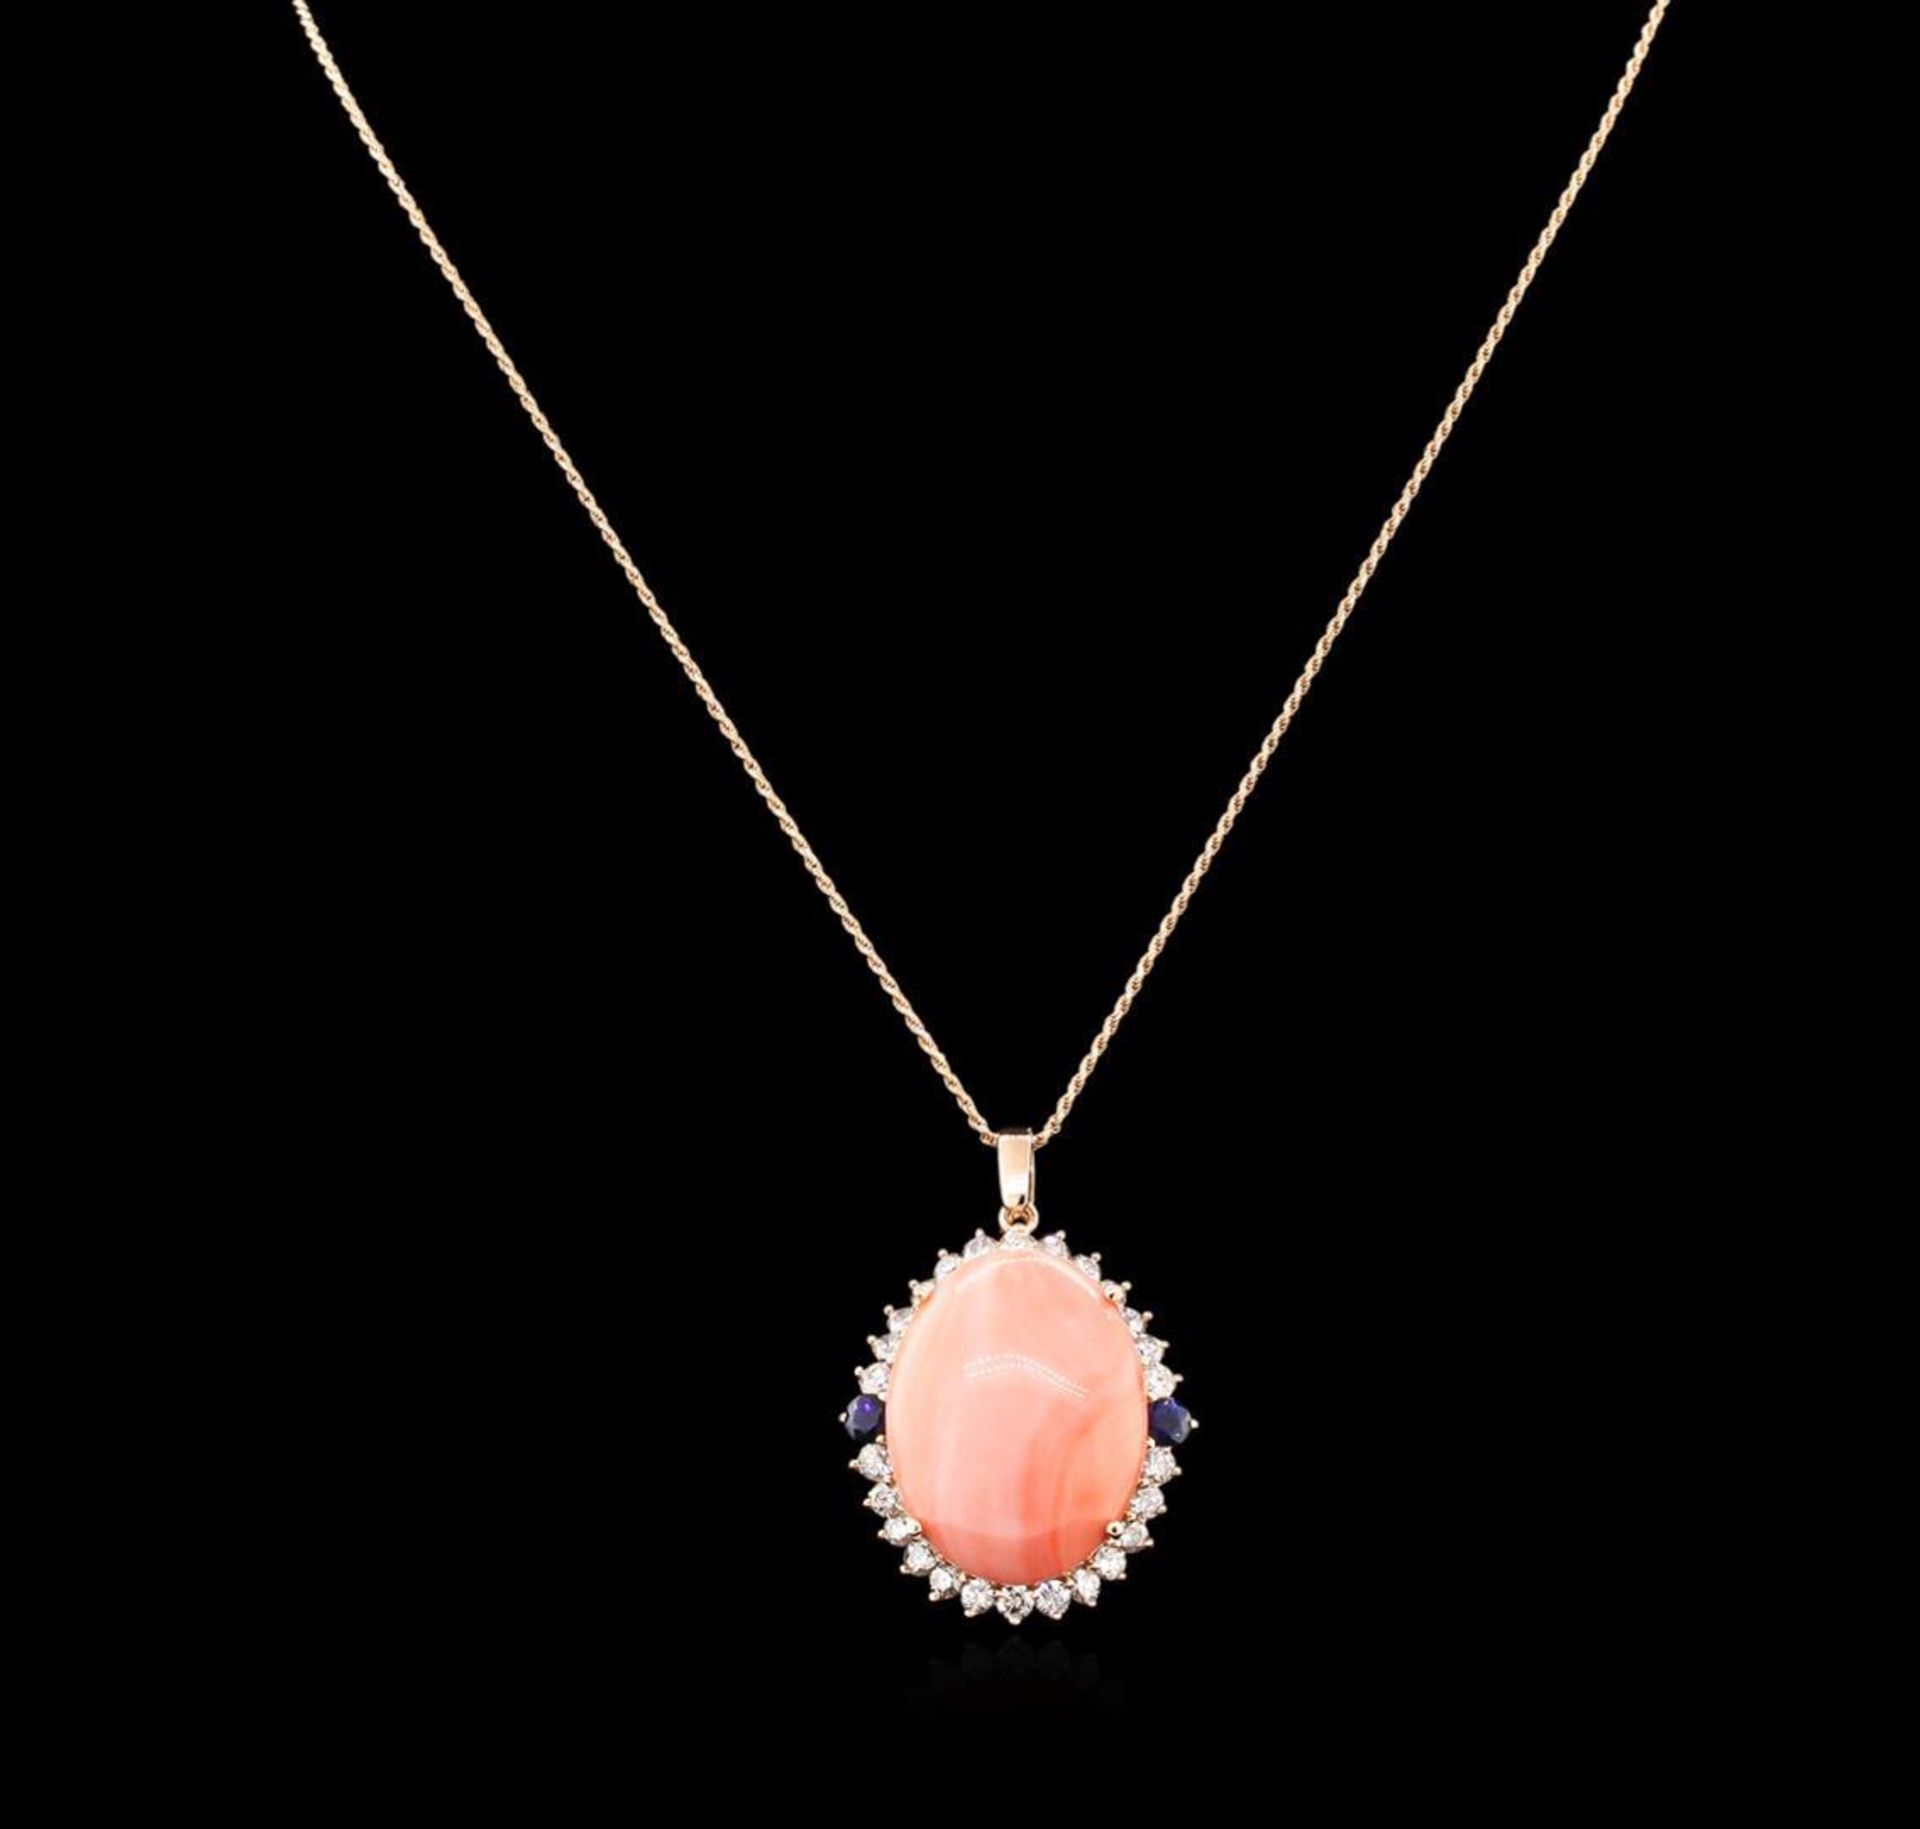 32.06 ctw Pink Coral, Sapphire, and Diamond Pendant With Chain - 14KT Rose Gold - Image 2 of 3